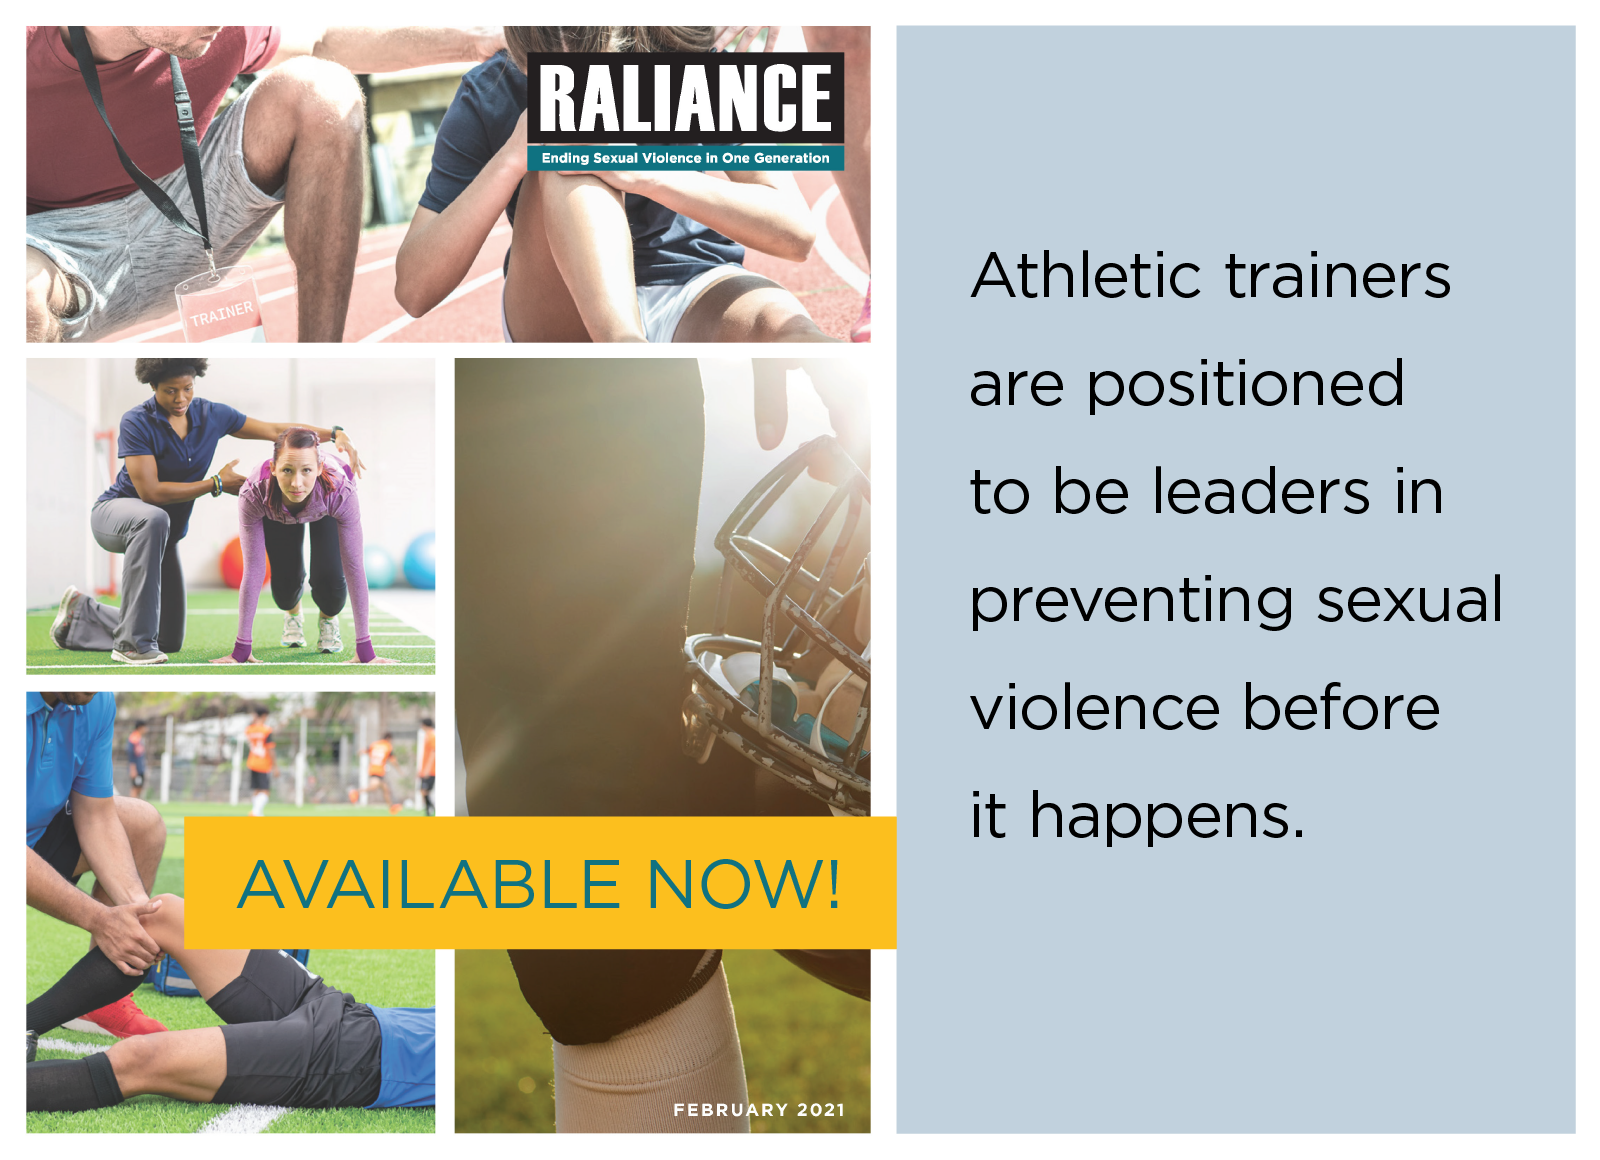 Athletic Trainers as Leaders in Sexual Violence Prevention